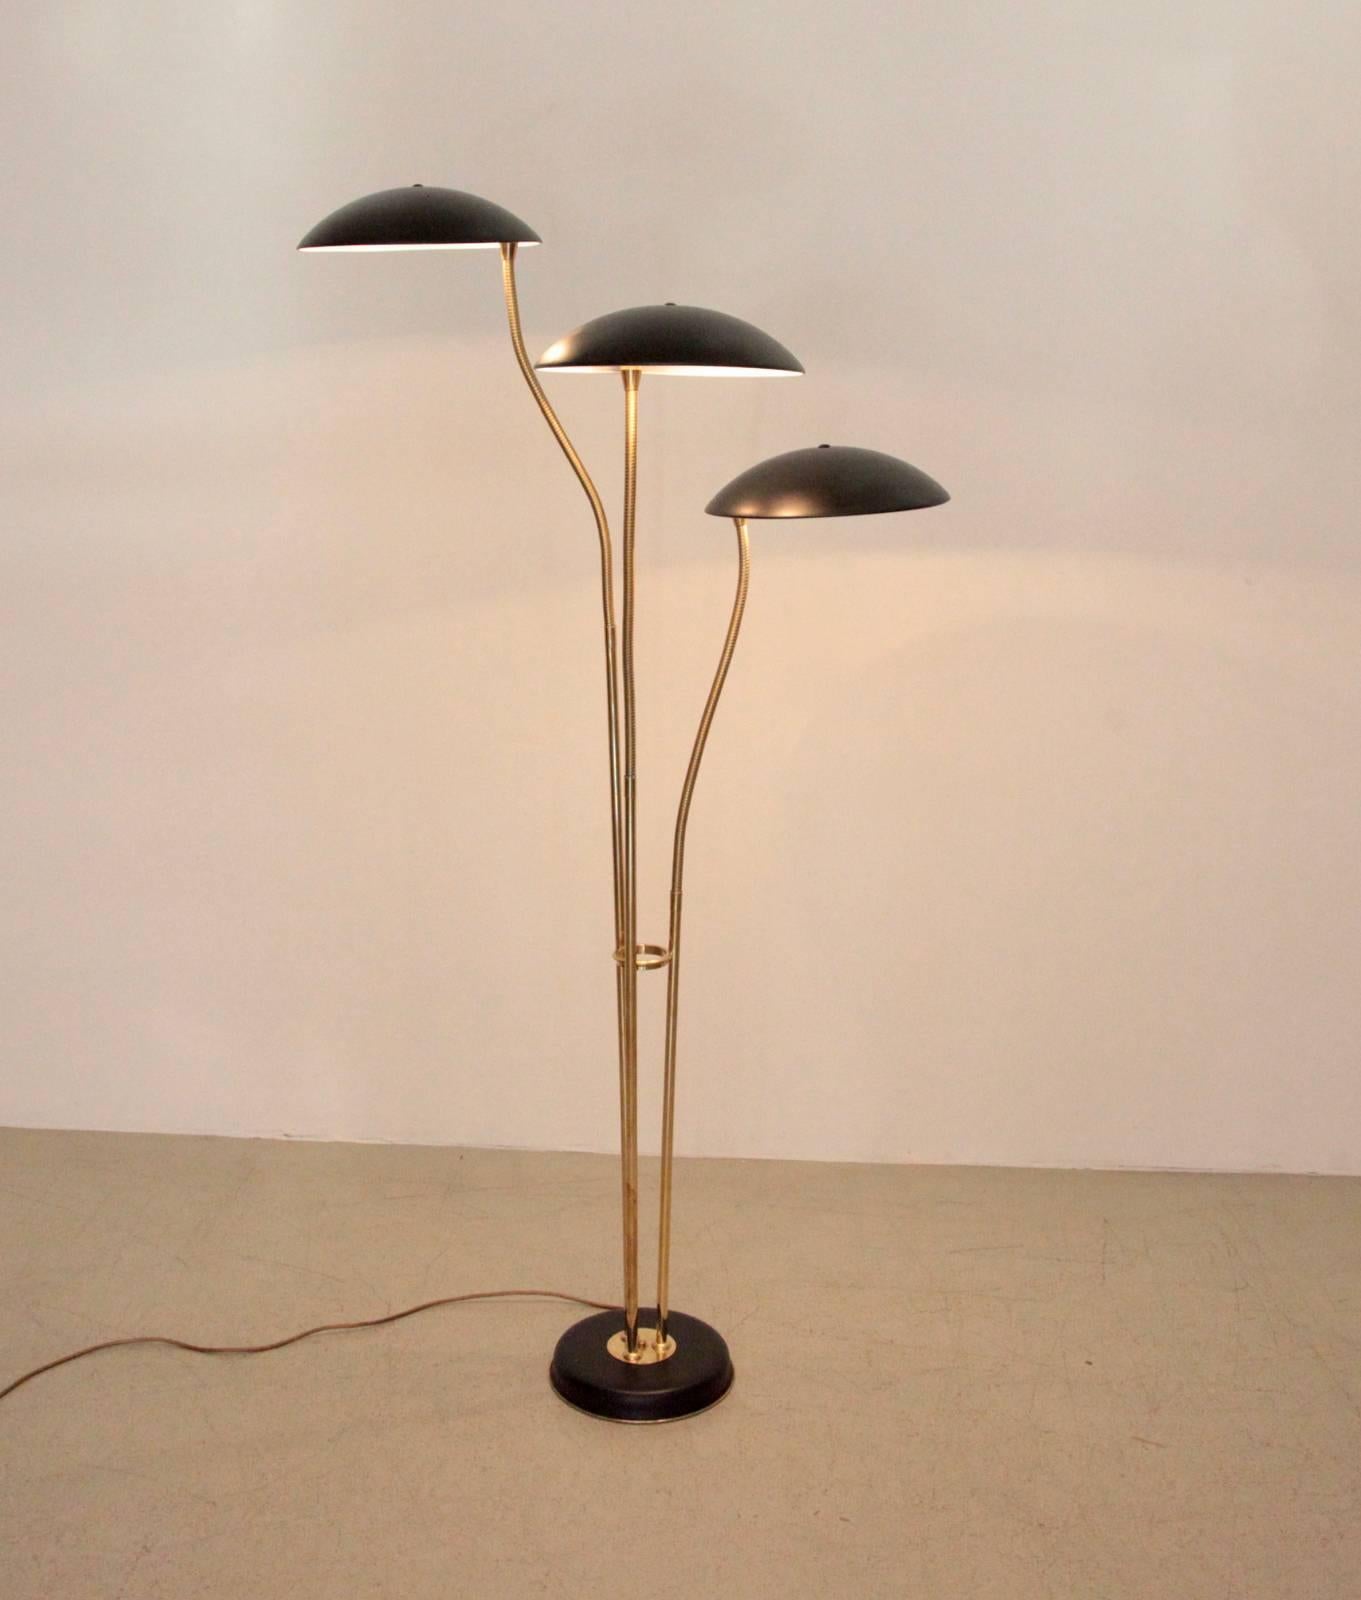 Very unusual Italian floor lamp with adjustable shades in black lacquered metal and brass arms. Condition is absolute excellent.

